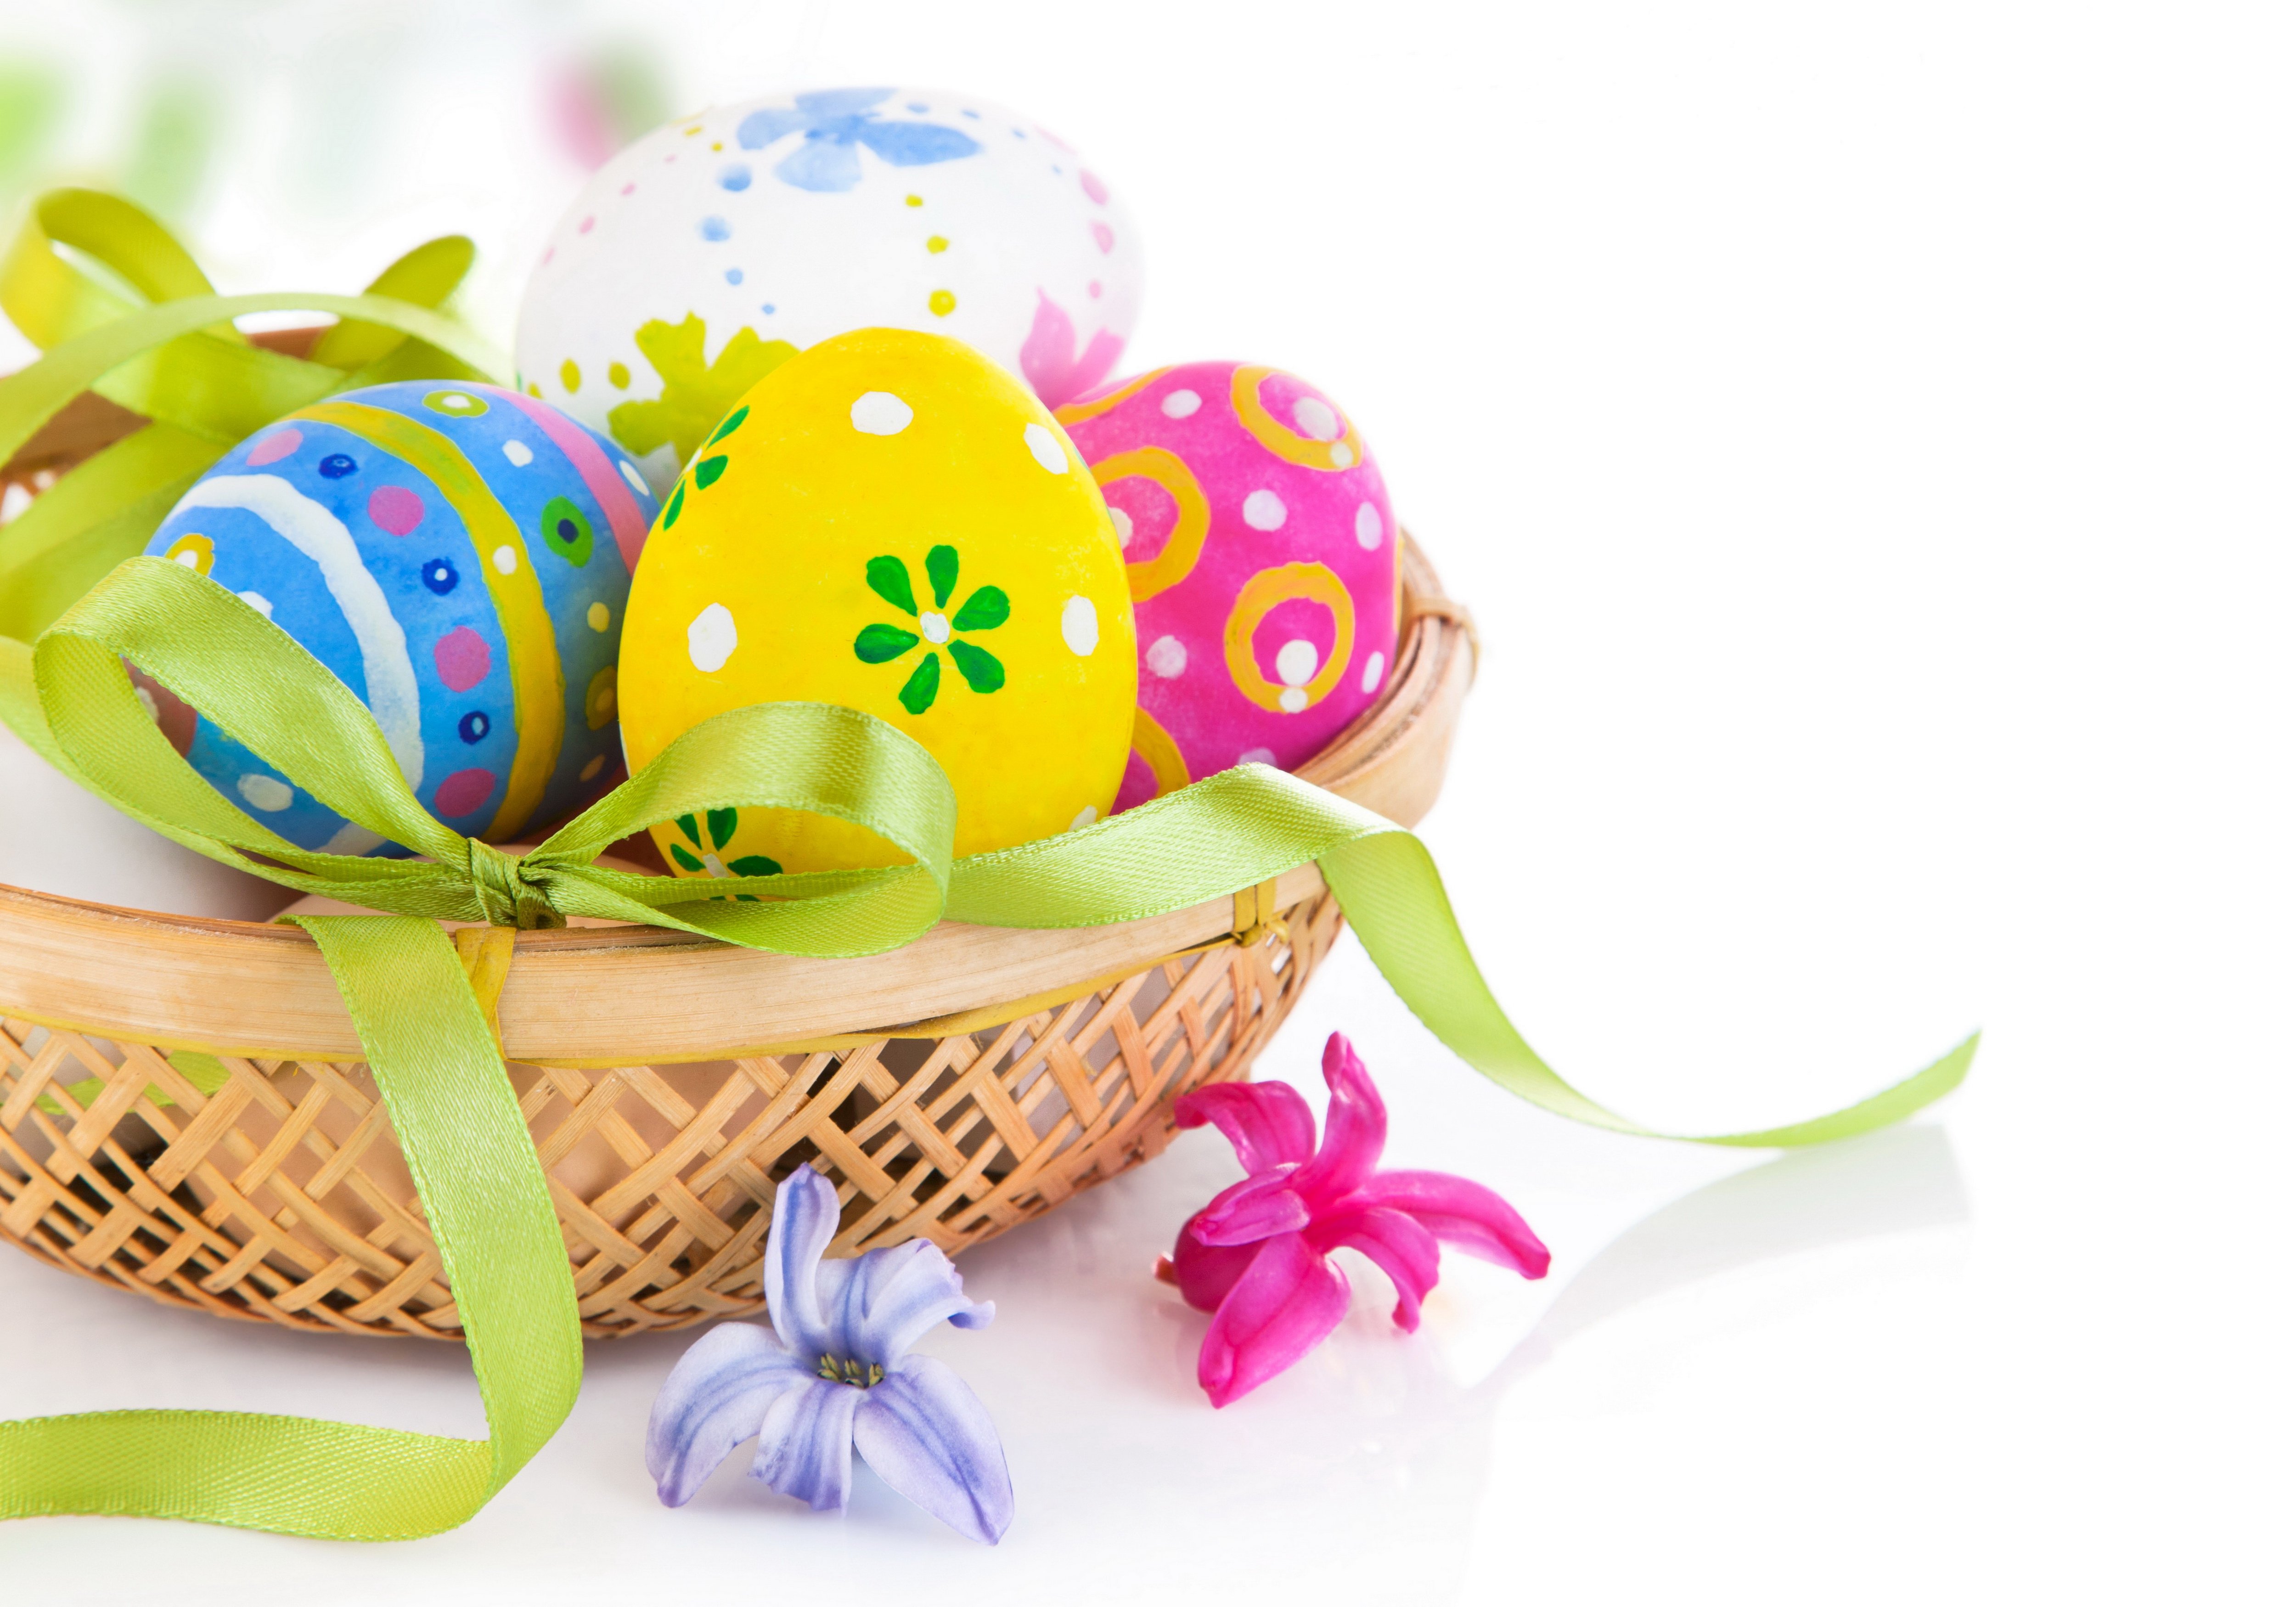 Happy Easter And Health - HD Wallpaper 